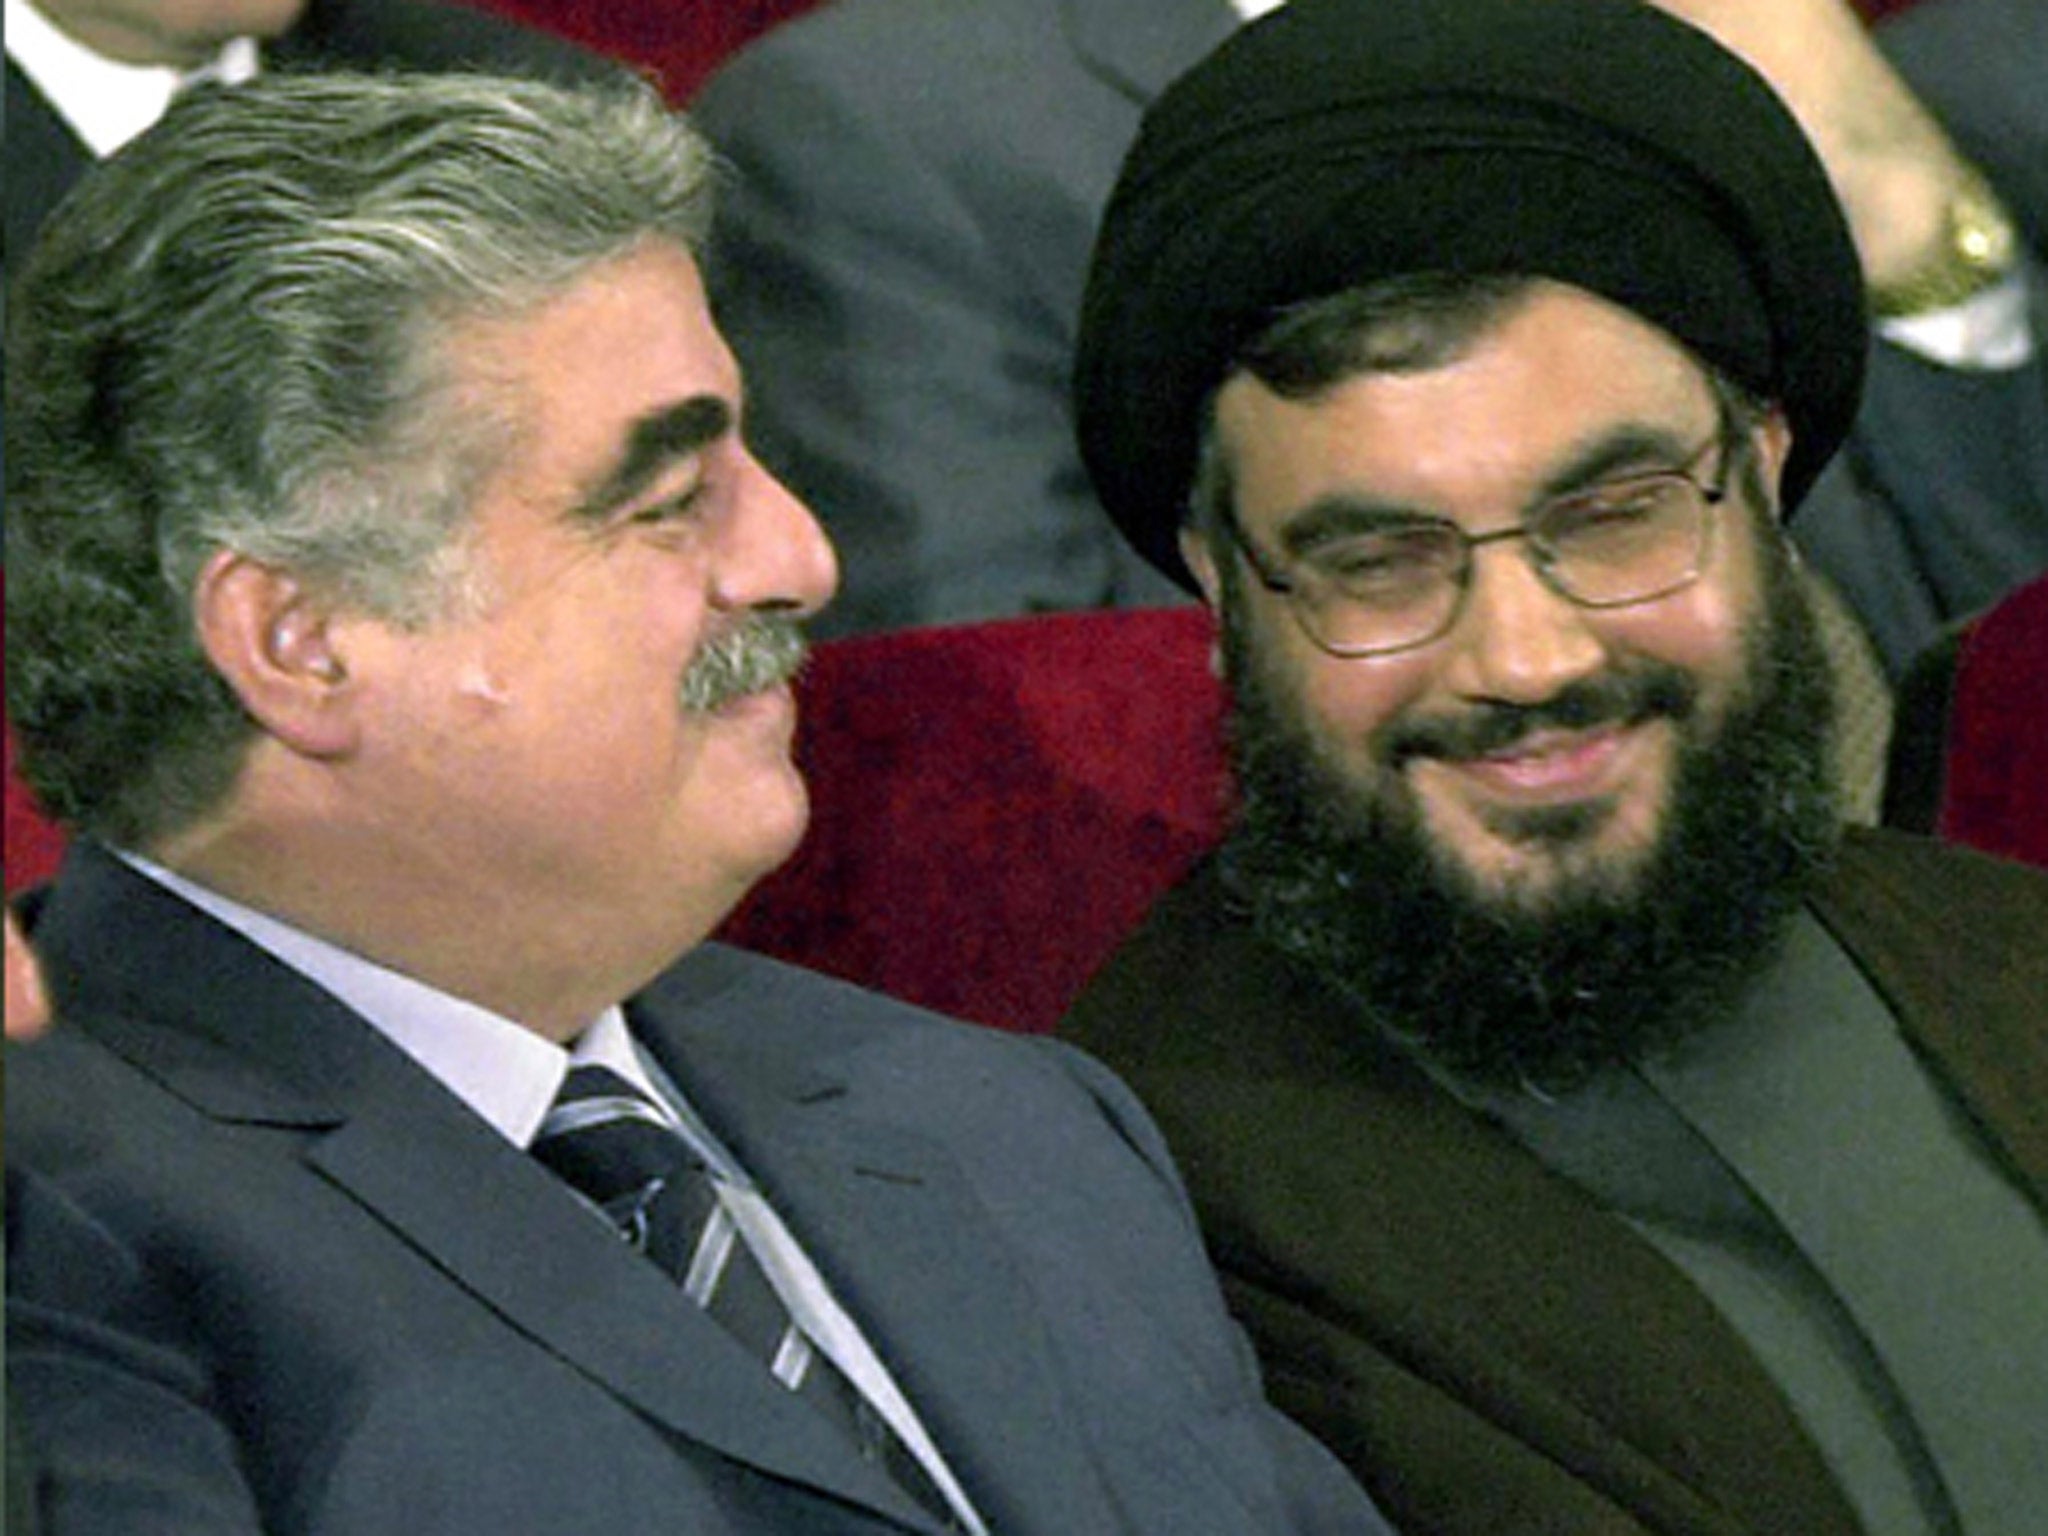 Lebanese Prime Minister Rafiq Hariri (left) in 2001 with Hassan Nasrallah, general secretary of Hezbollah, which is suspected of his murder